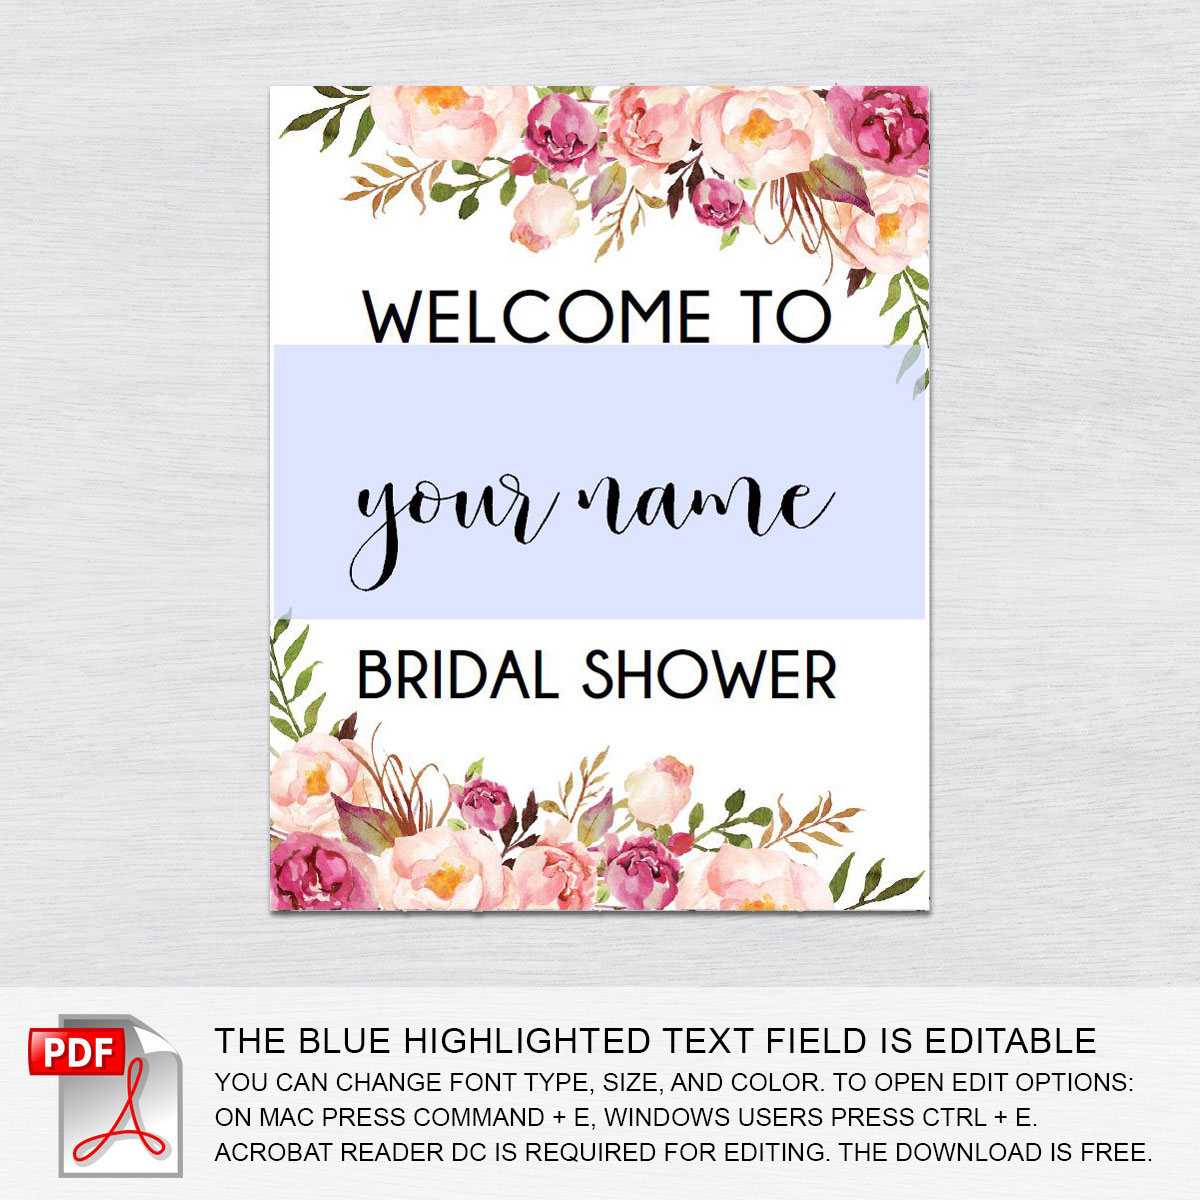 013 Template Ideas Il Fullxfull 1Exj Bridal Shower Welcome With Free Bridal Shower Banner Template